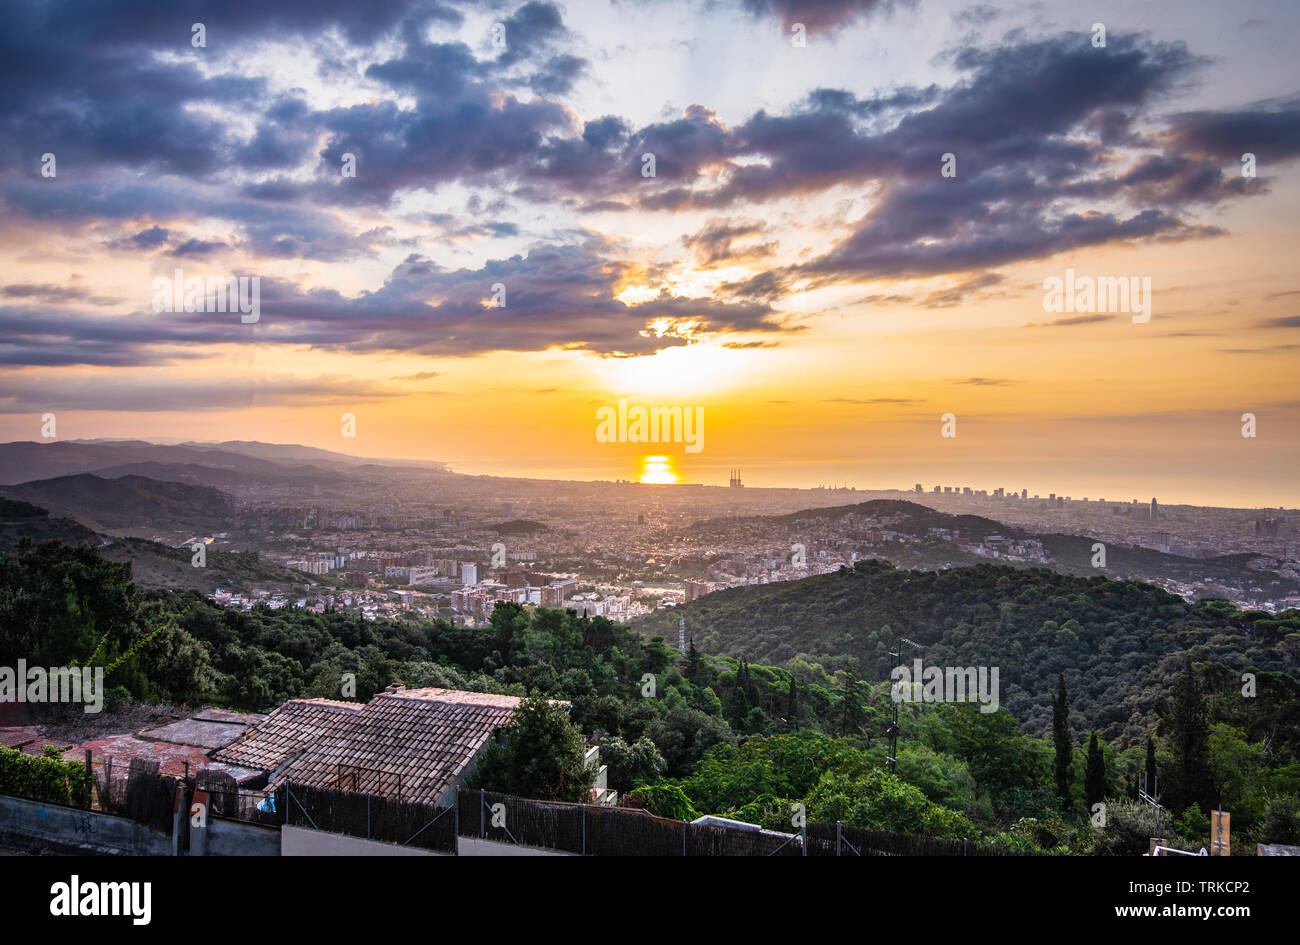 Sunrise in the city seen from the mountain Stock Photo